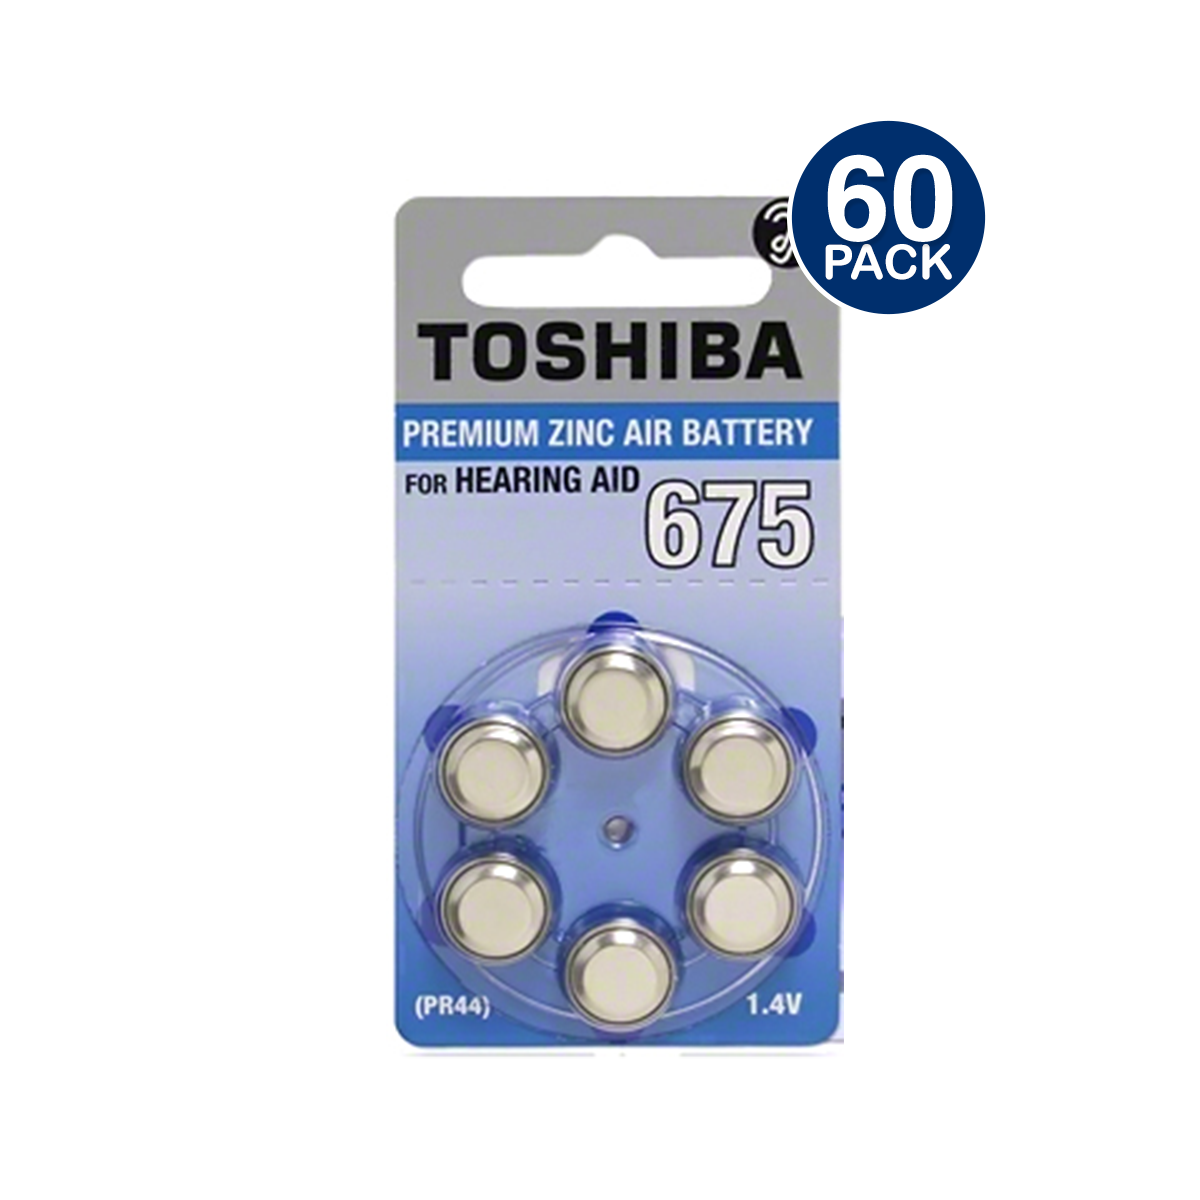 Toshiba Size 675 Hearing Aid Batteries (60 PC)